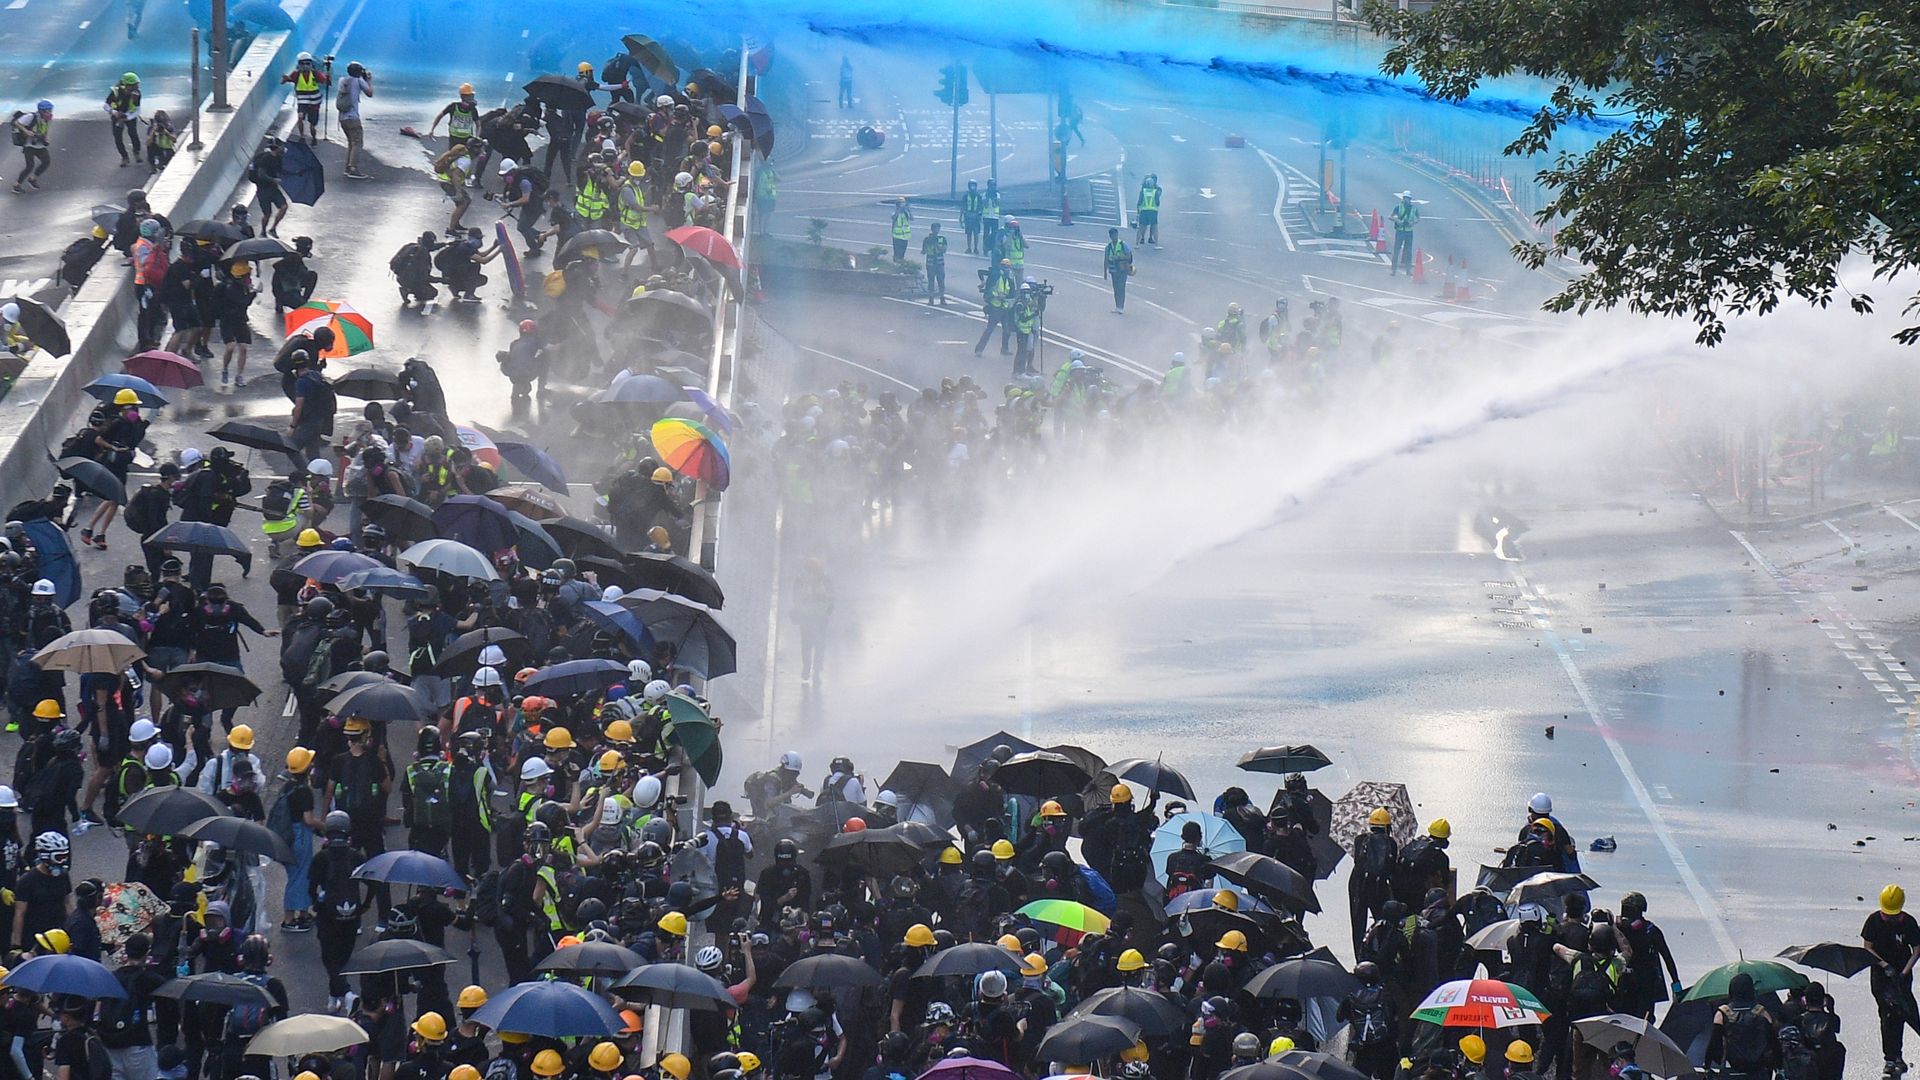 Pro-democracy protesters react as police fire water cannons outside the government headquarters in Hong Kong on September 15